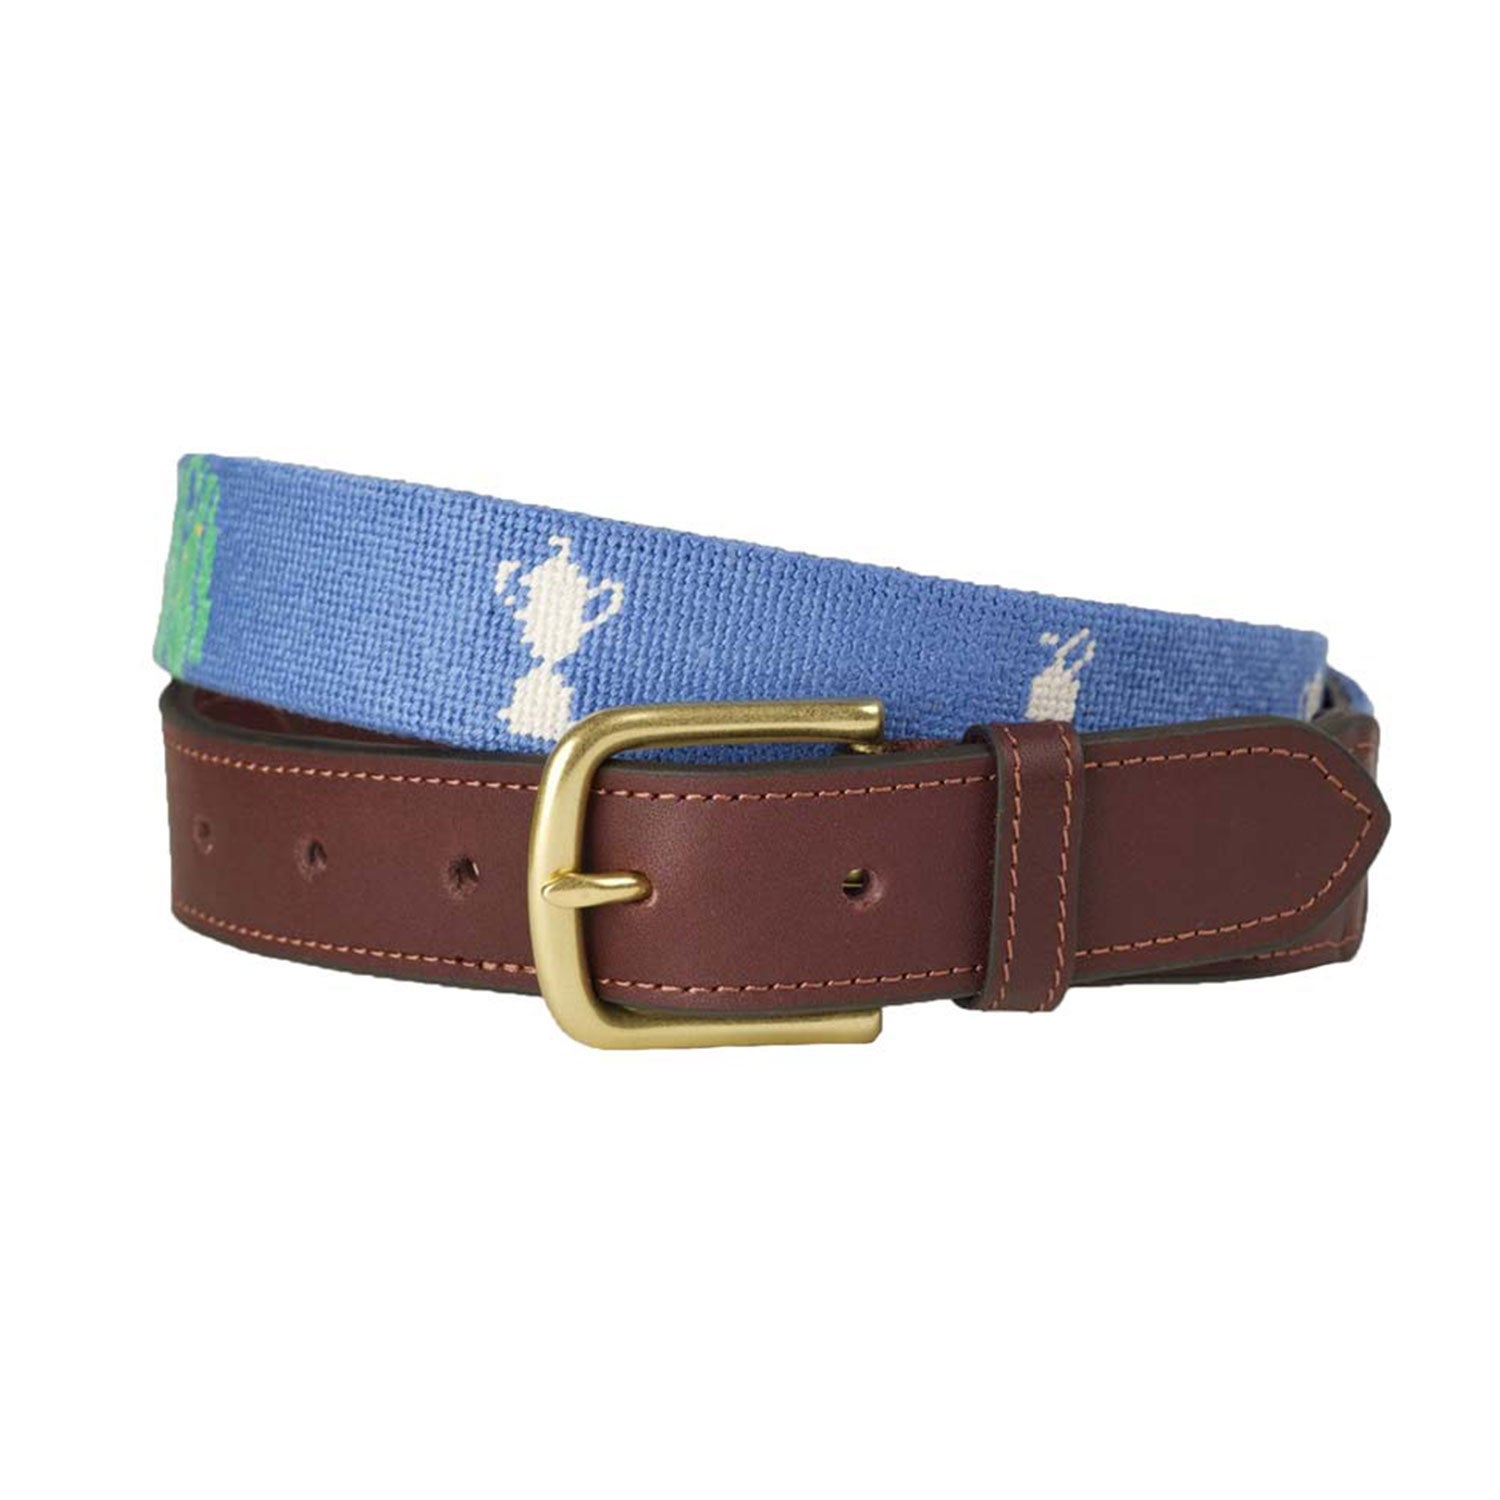 5 great belts to wear on the golf course: GOLF Fall 2020 Style Guide